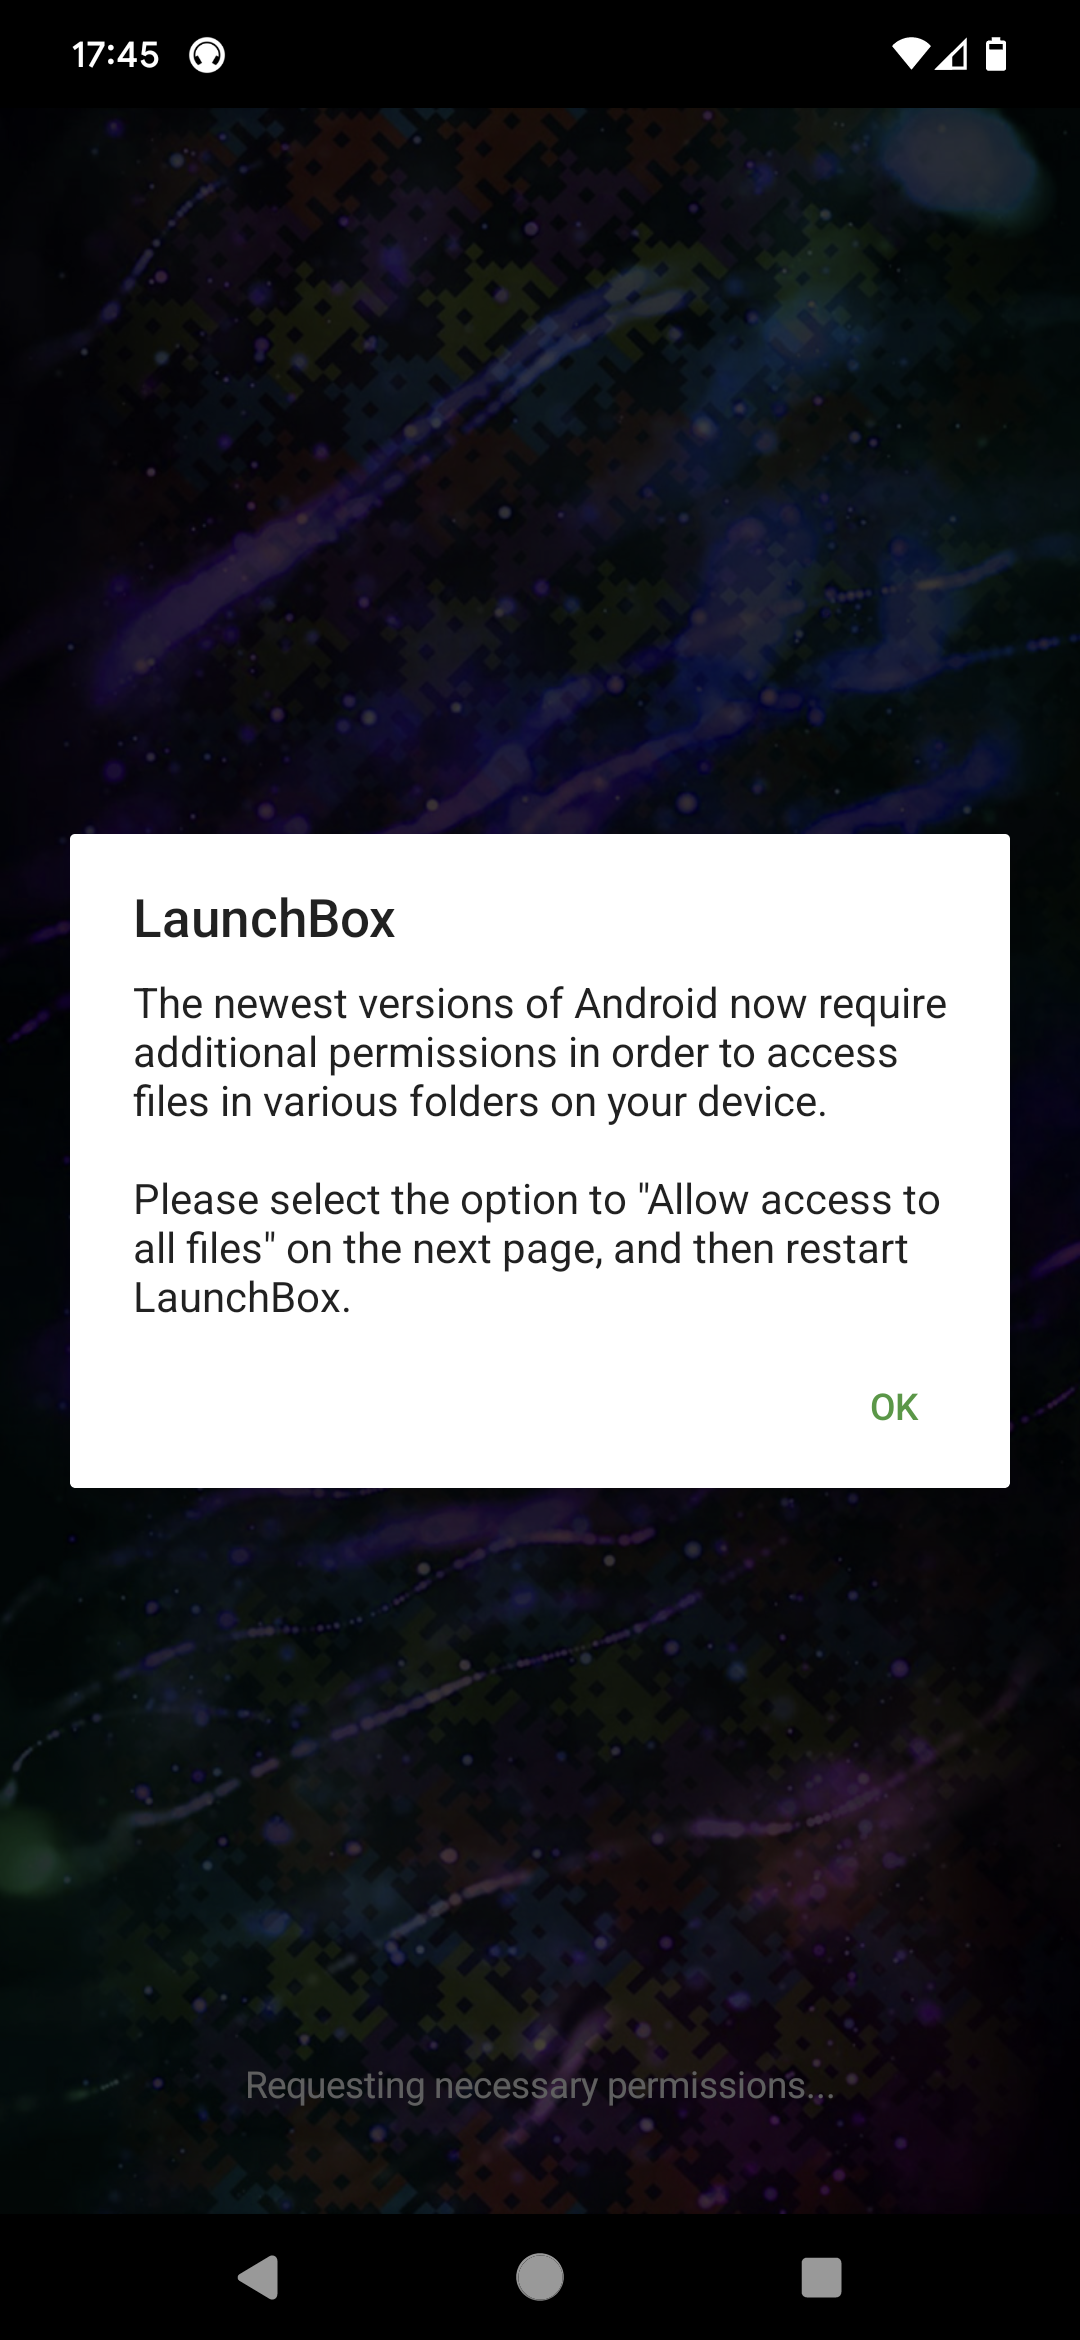 LaunchBox for Android